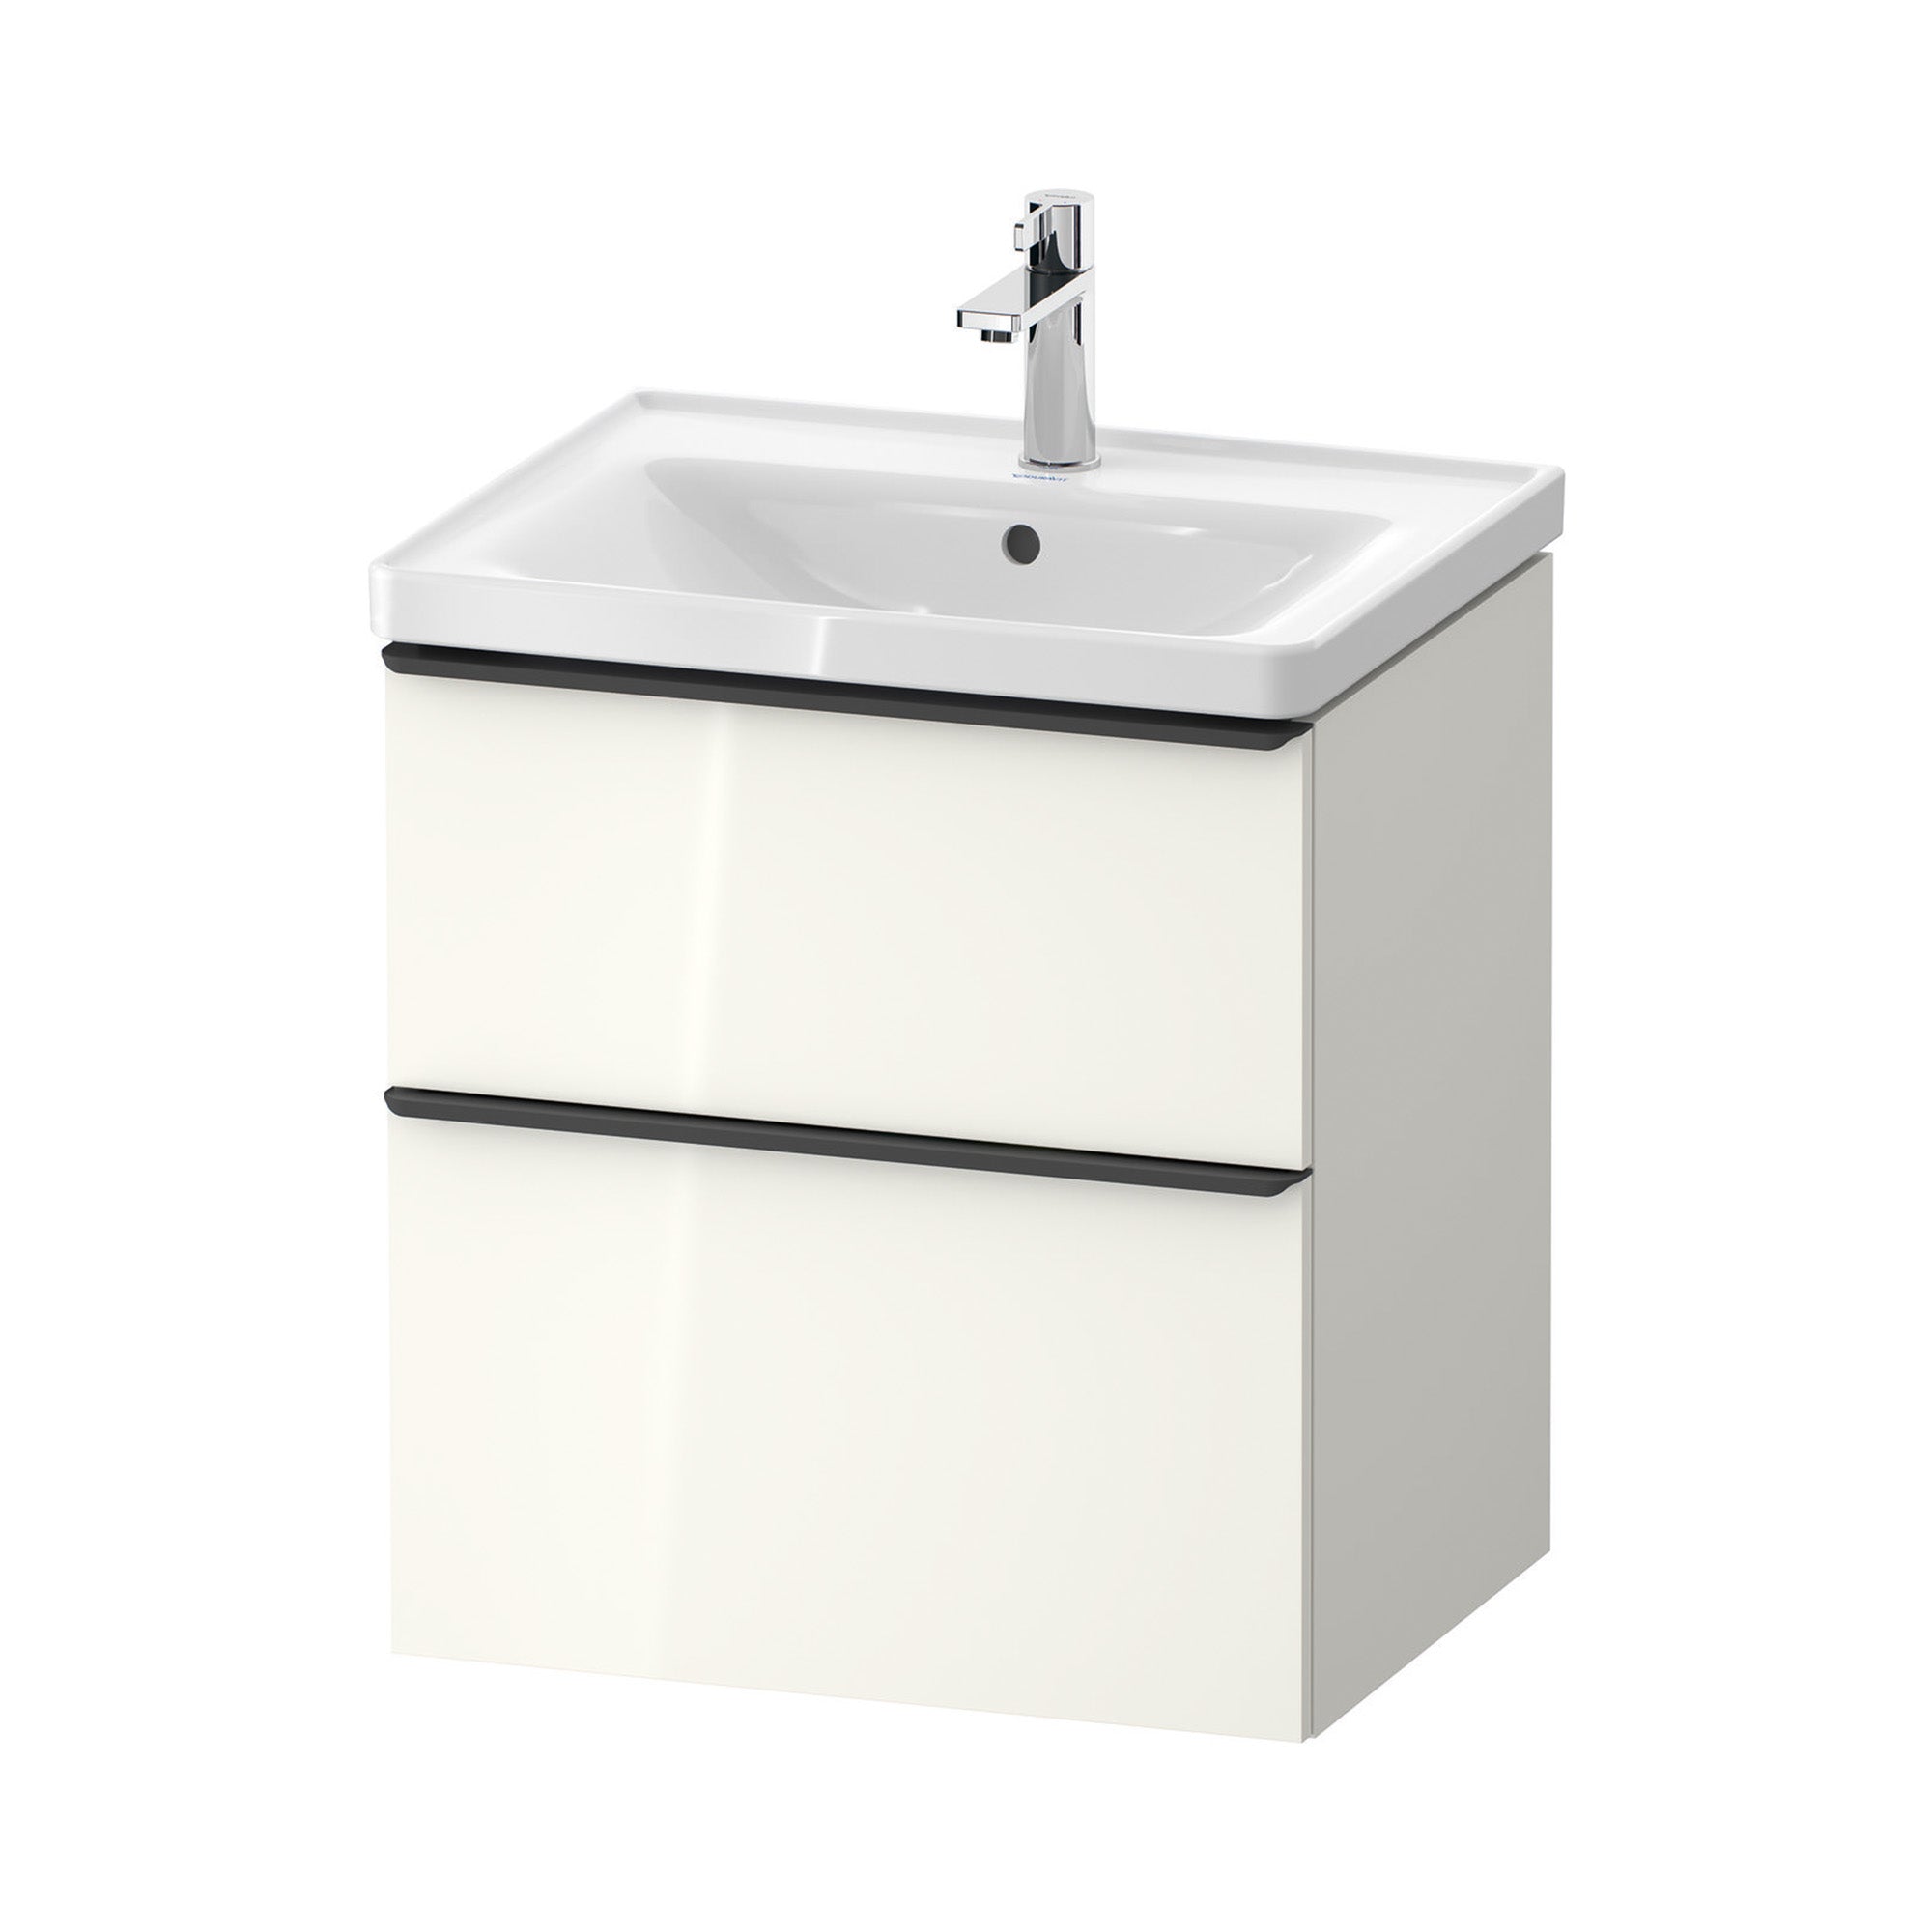 duravit d-neo 600 wall mounted vanity unit with d-neo basin gloss white diamond black handles